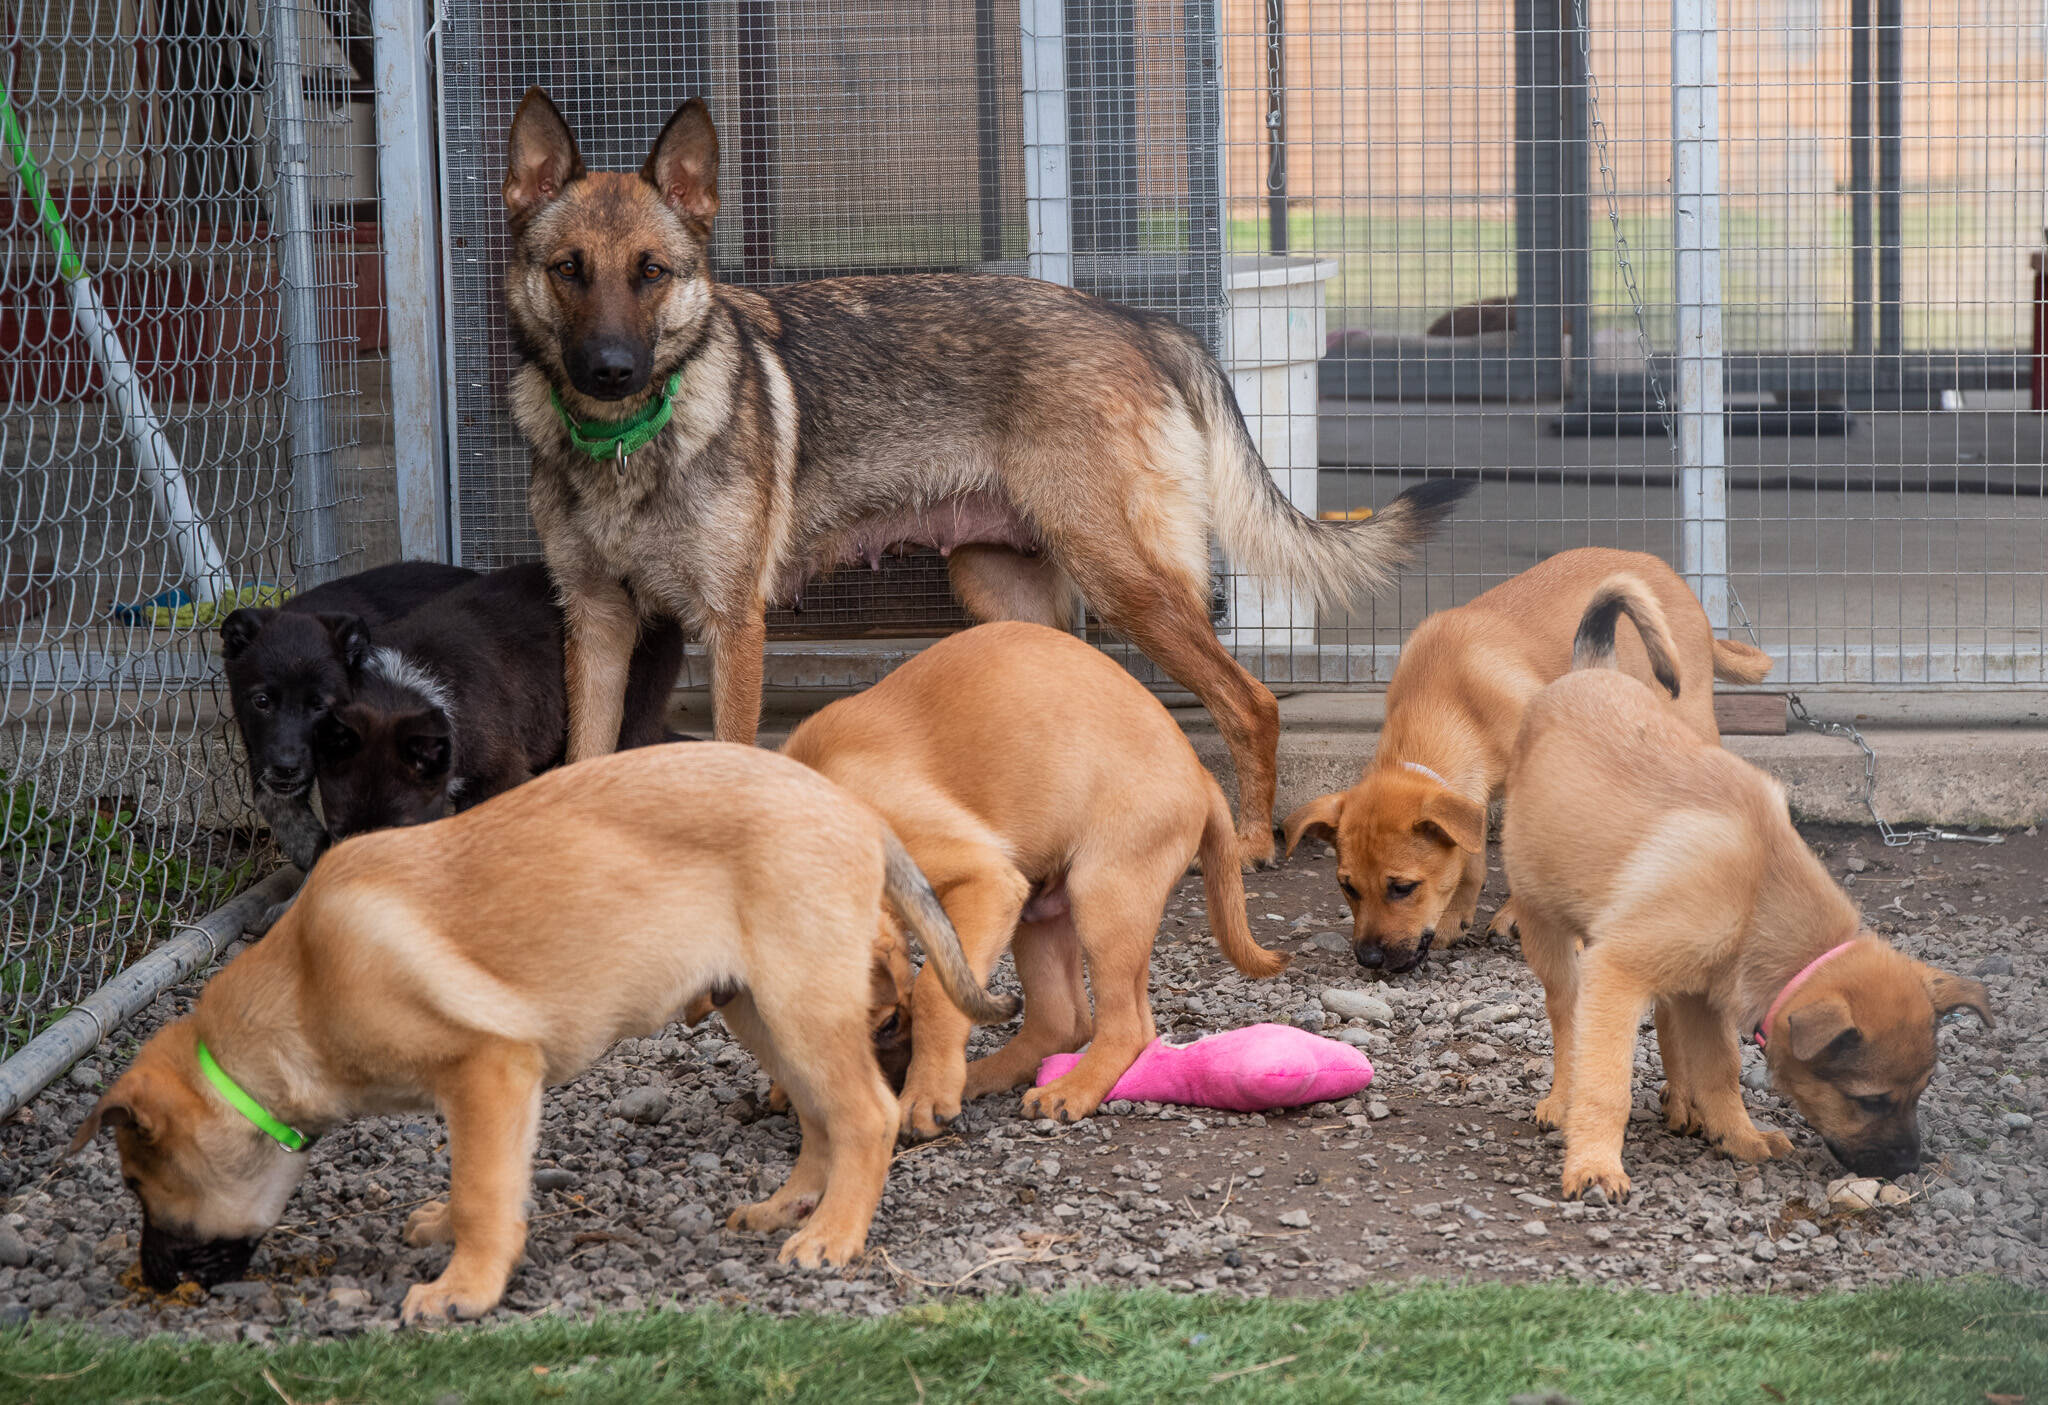 Photos by Emily Matthiessen / Olympic Peninsula News Group
The German shepherd mix, Phoenix, was rescued and transported to Olympic Peninsula Humane pregnant with seven puppies. Some of the puppies will be up for adoption at an event at Best Friend Nutrition in Sequim.